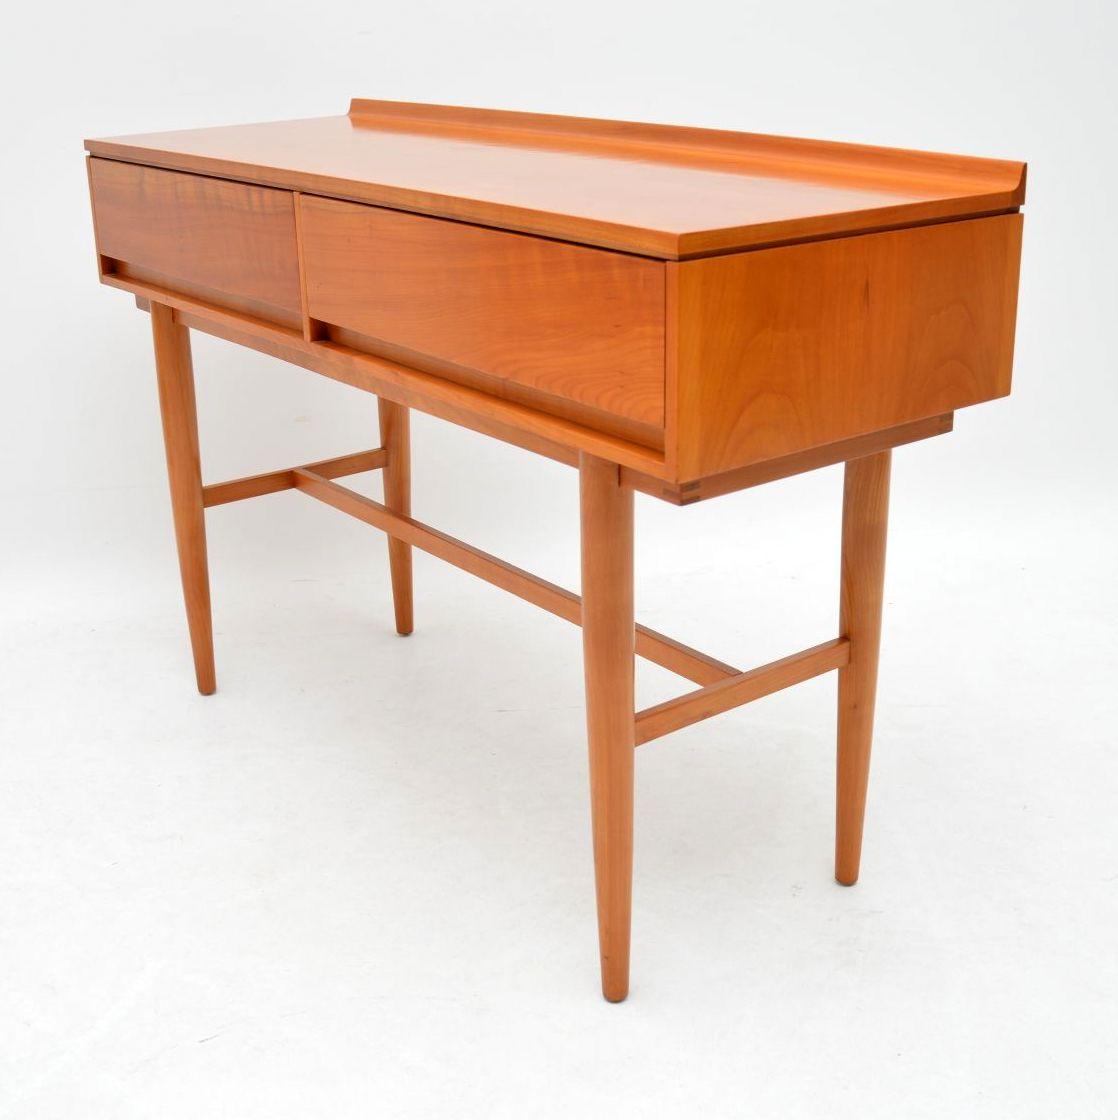 British 1960s Vintage Satin Wood Side Table by Beresford & Hicks